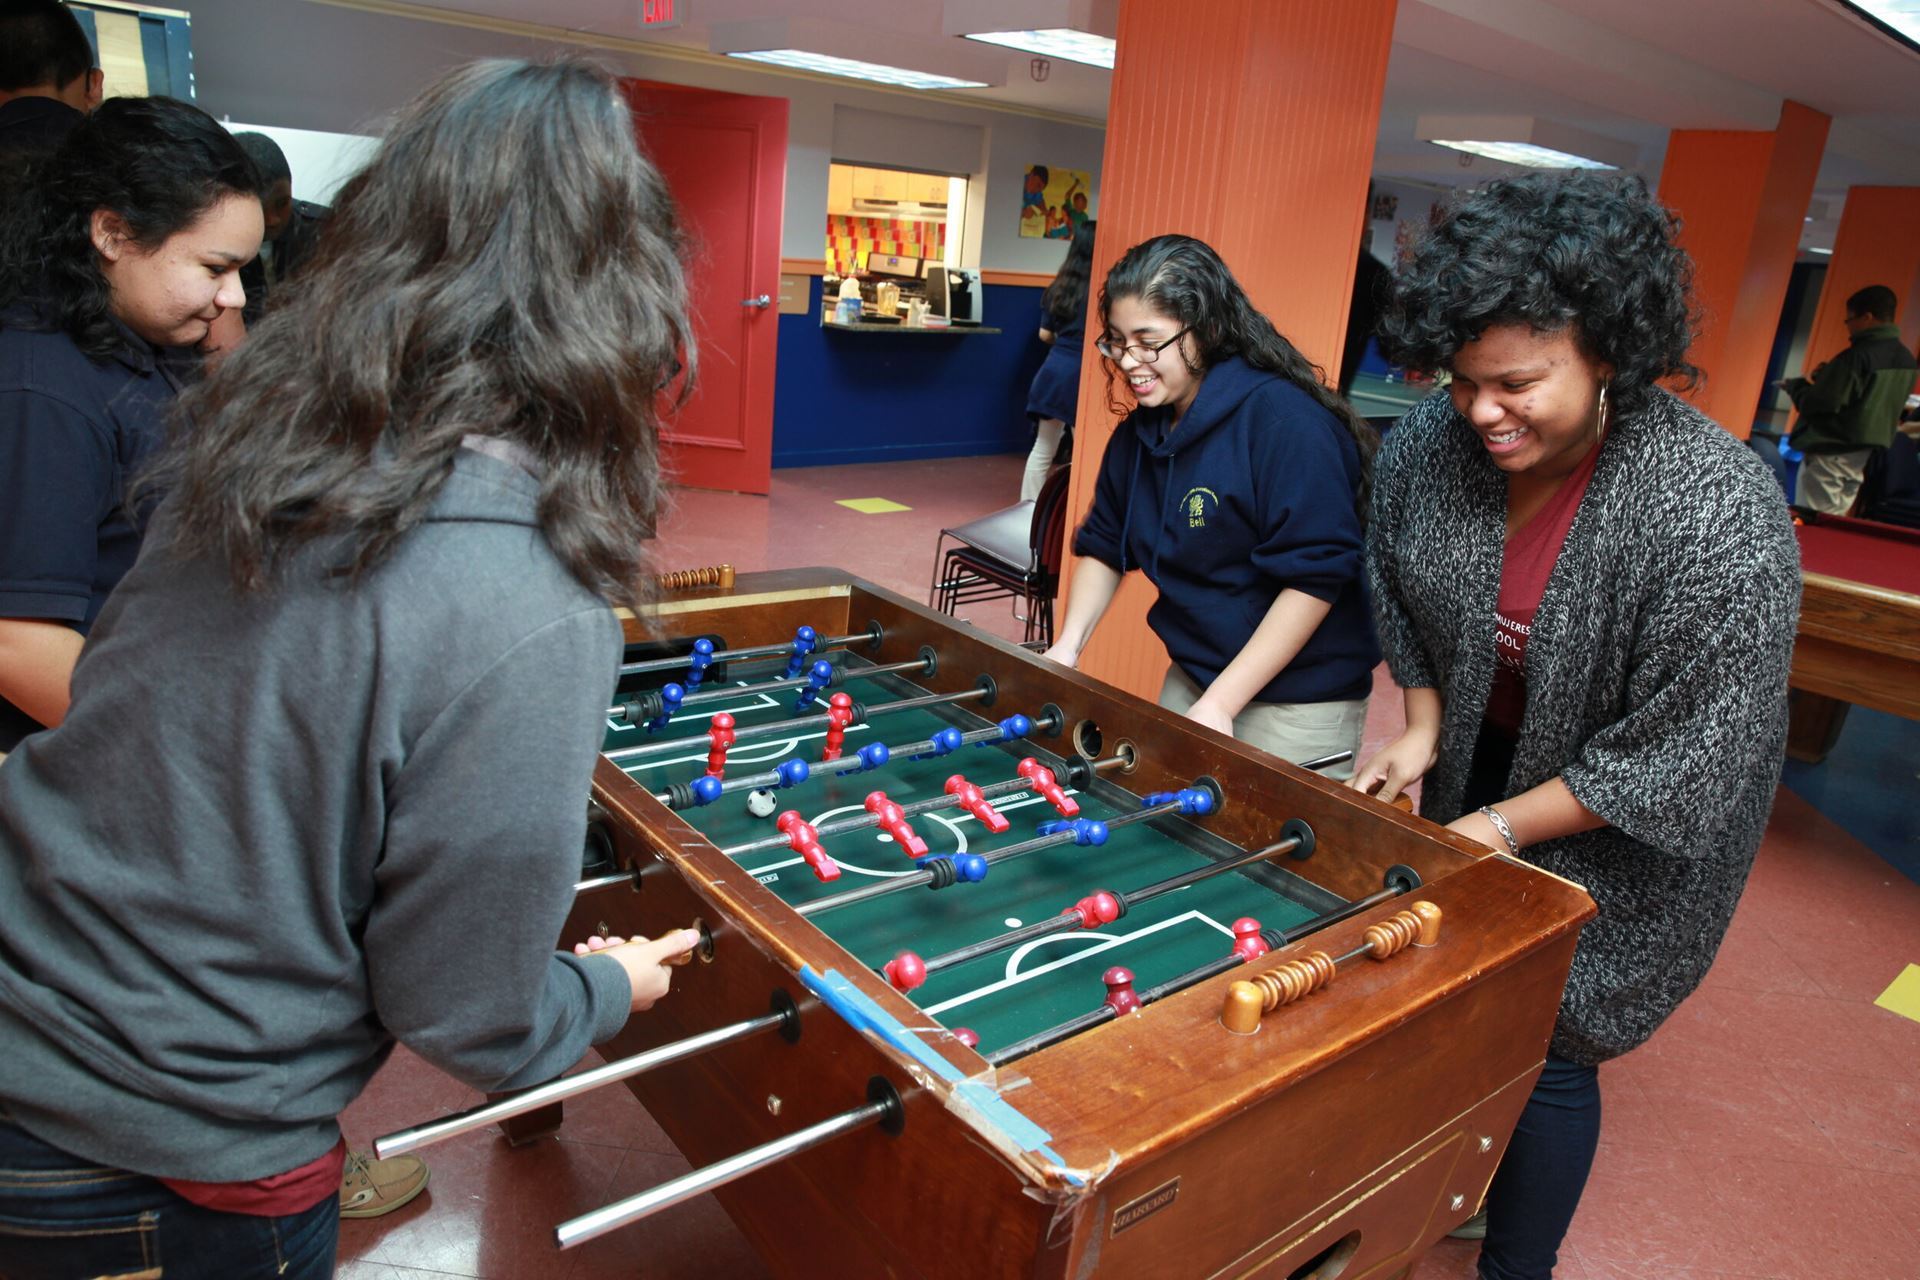 A group of young people playing foosball in a rec center.